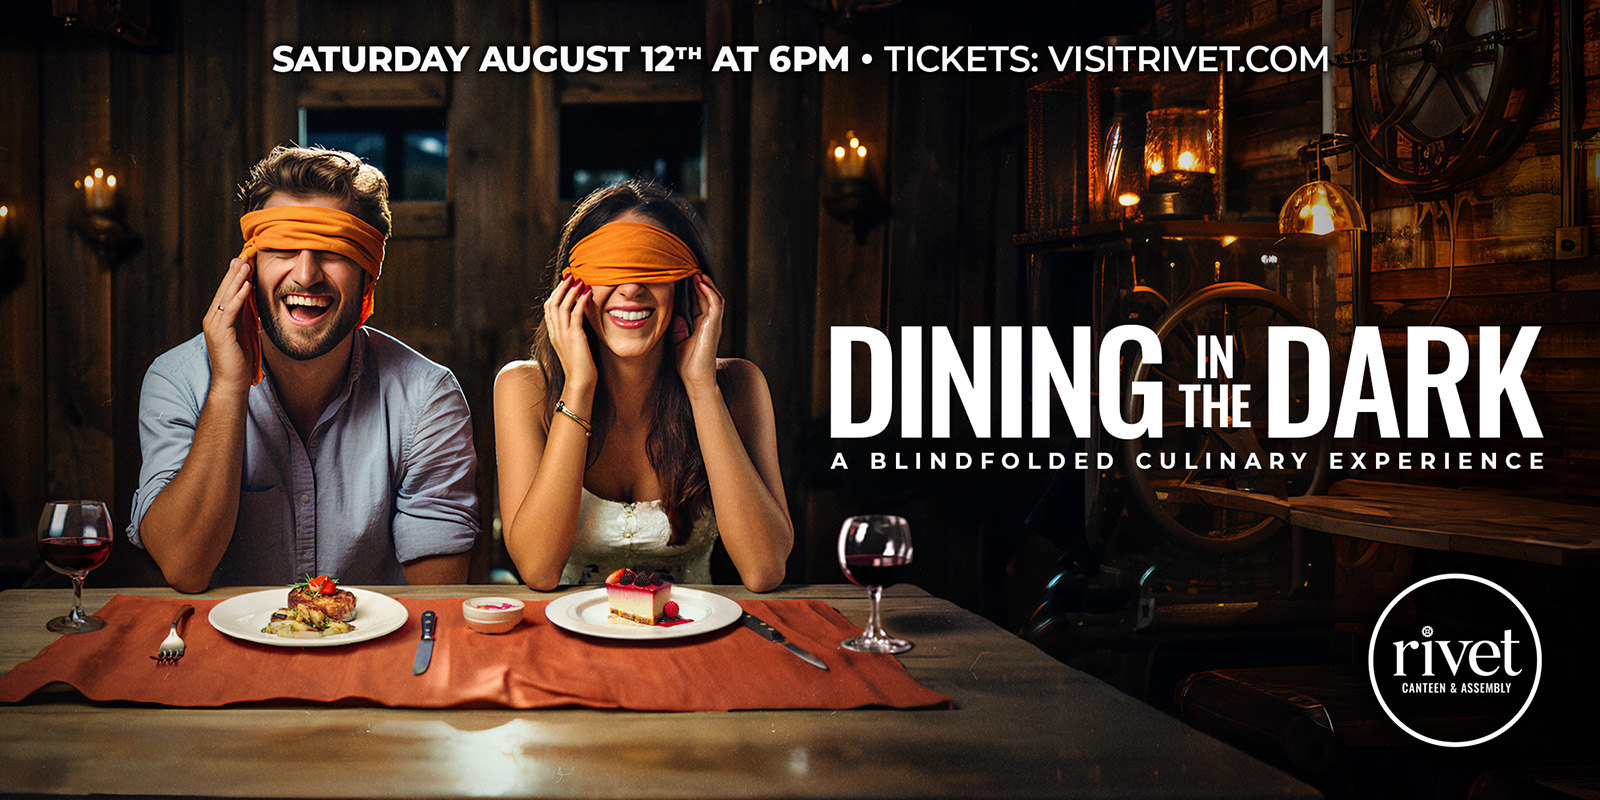 Dining In The Dark at Rivet: Canteen & Assembly on Friday, August 12th, 2023. Tickets are limited, don’t miss out! Book your ticket today and embark on a culinary journey like no other!